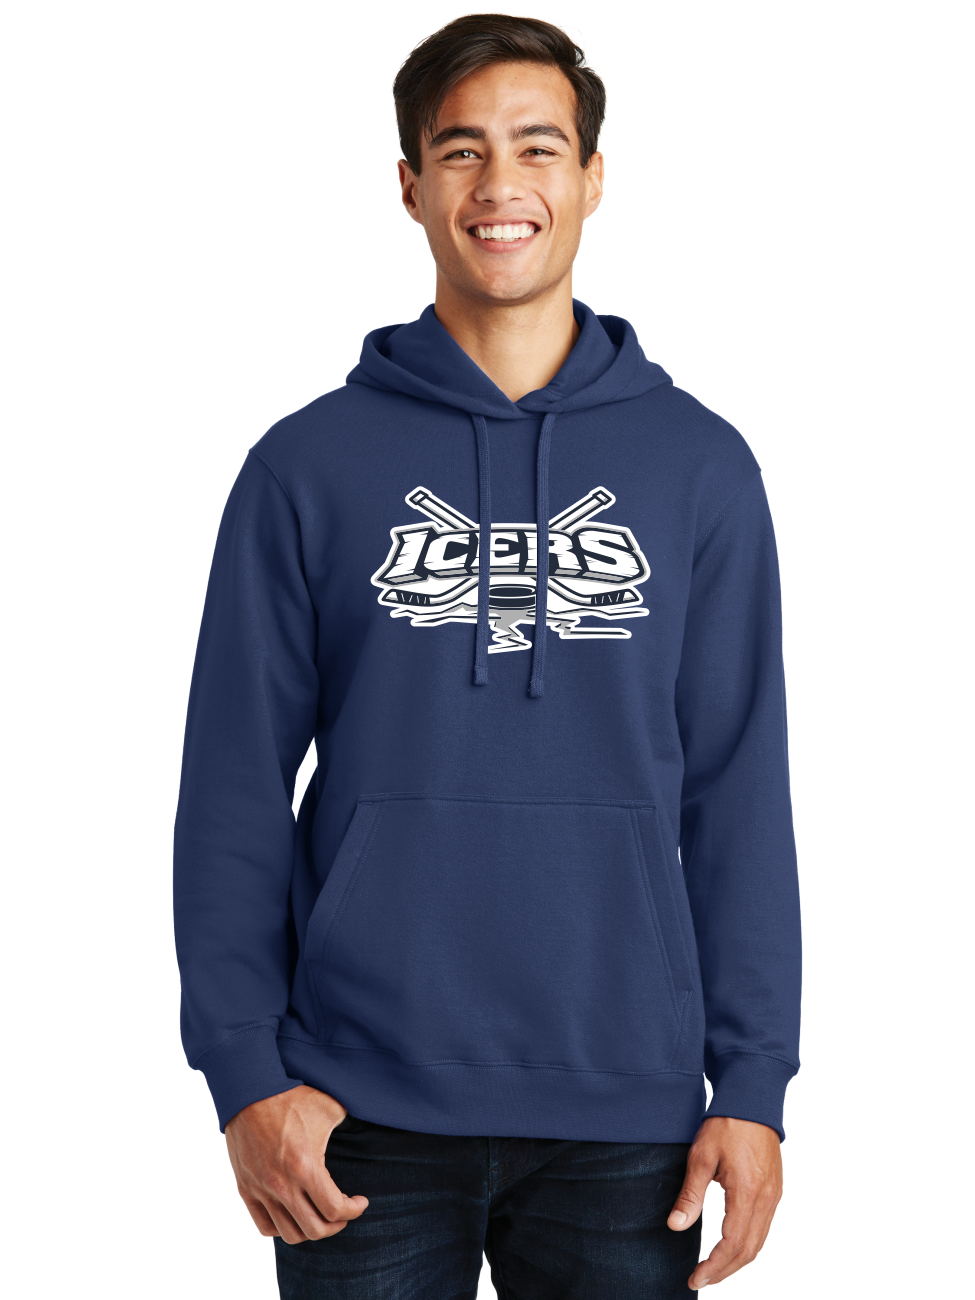 Logo Hoodie - Icers - Multiple Colors Available